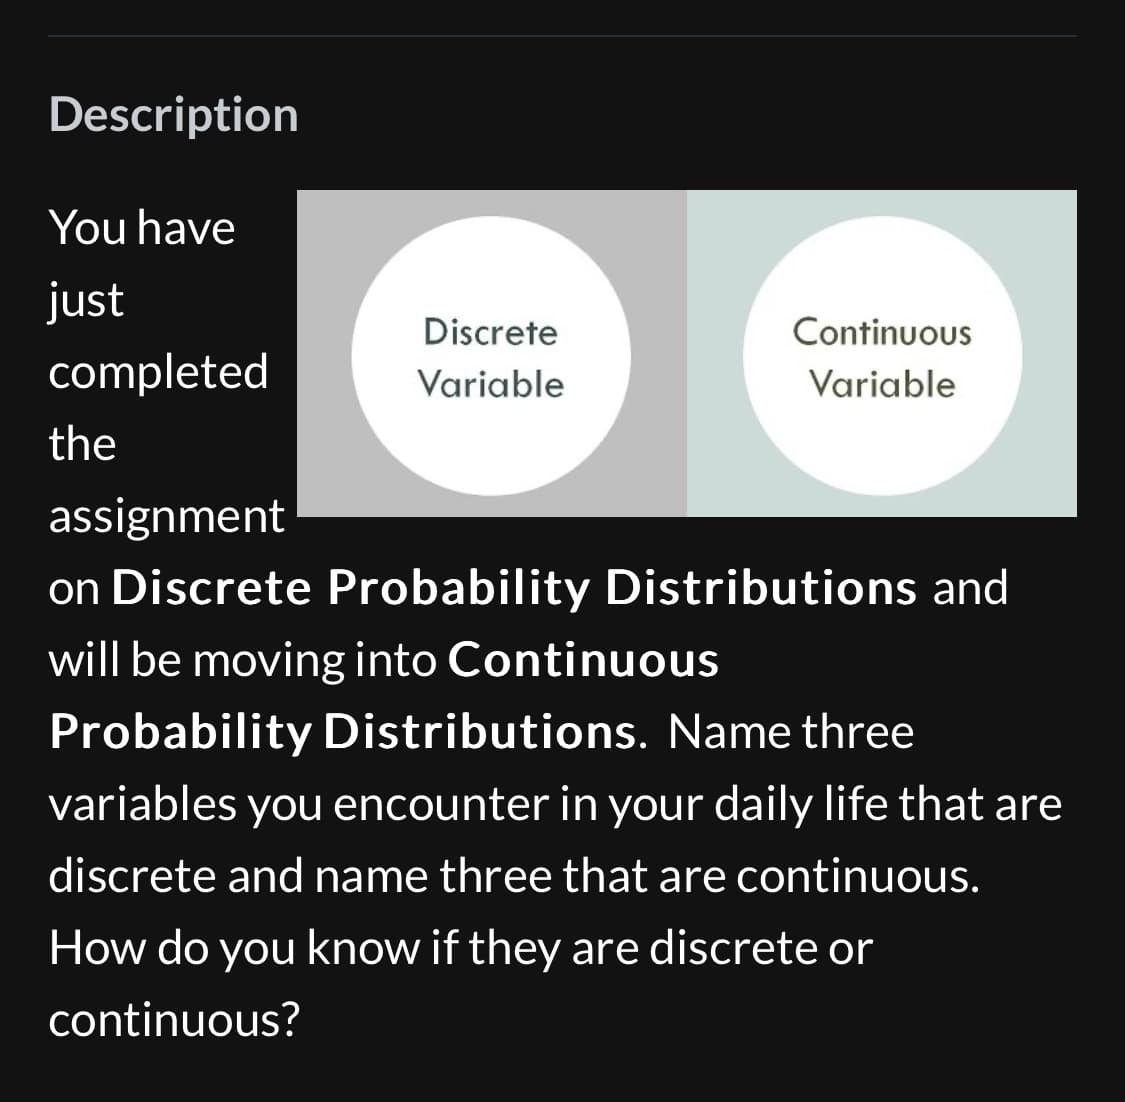 Description
You have
just
completed
the
Discrete
Variable
Continuous
Variable
assignment
on Discrete Probability Distributions and
will be moving into Continuous
Probability Distributions. Name three
variables you encounter in your daily life that are
discrete and name three that are continuous.
How do you know if they are discrete or
continuous?